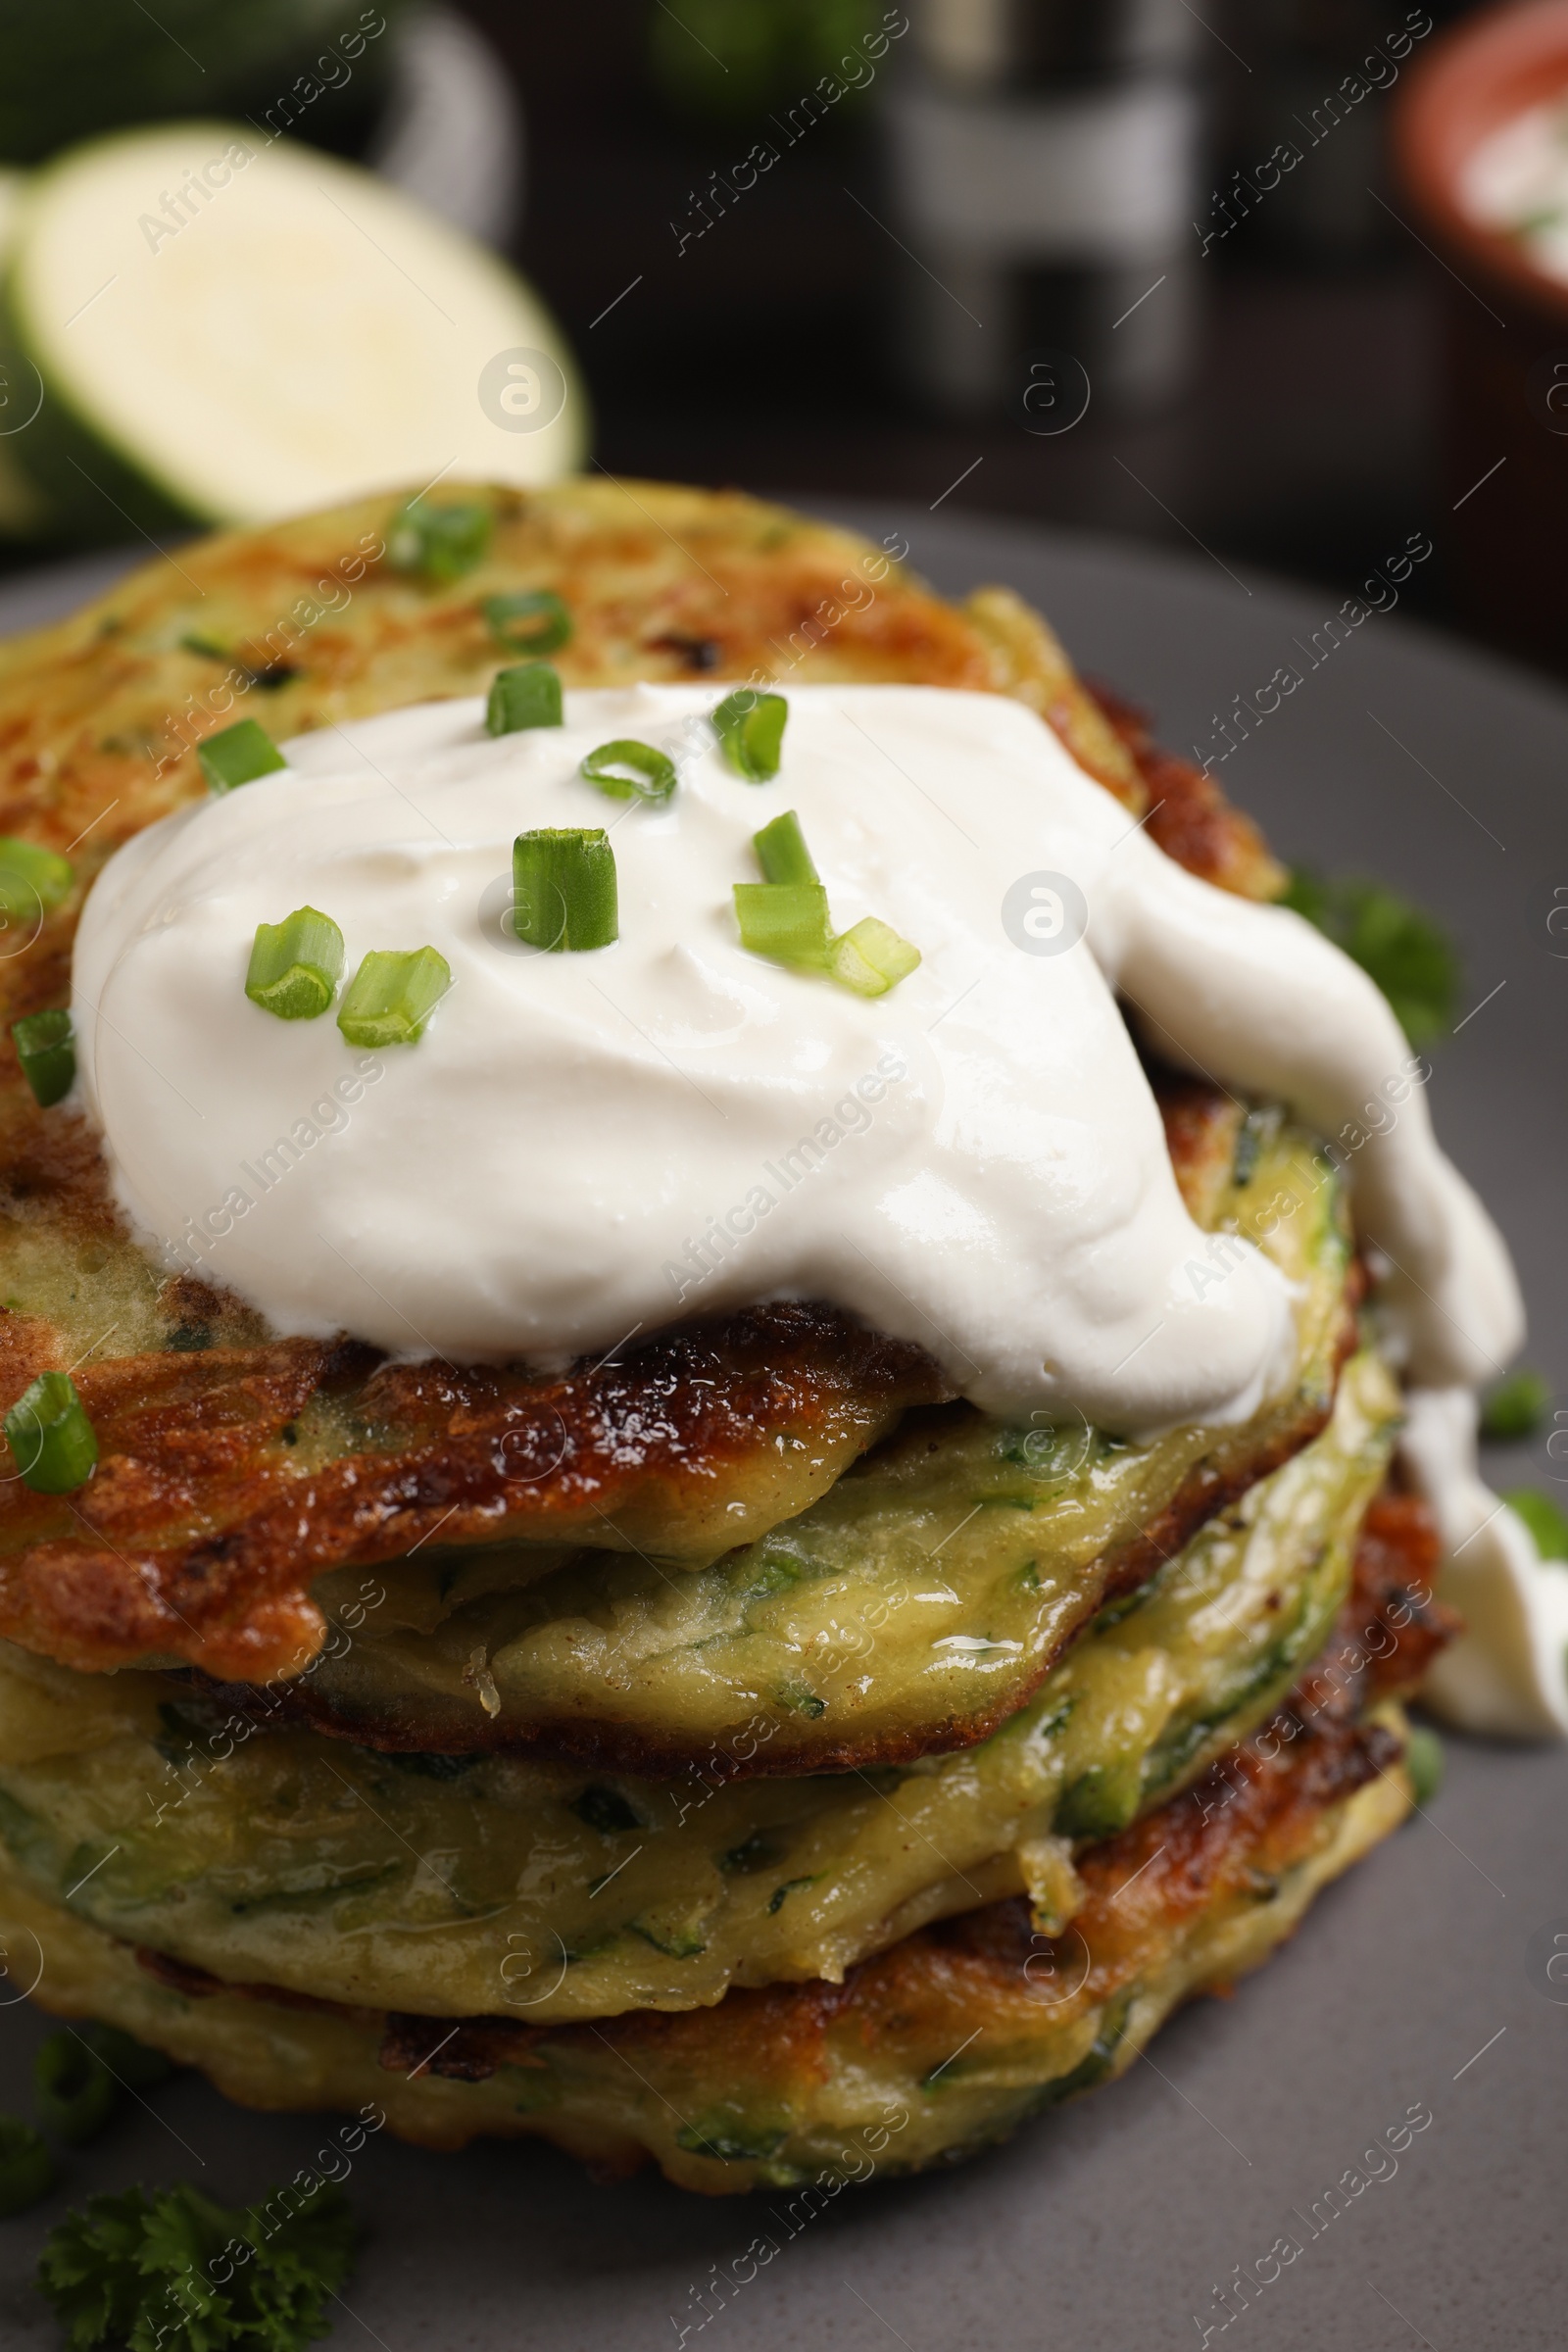 Photo of Delicious zucchini fritters with sour cream on plate, closeup view